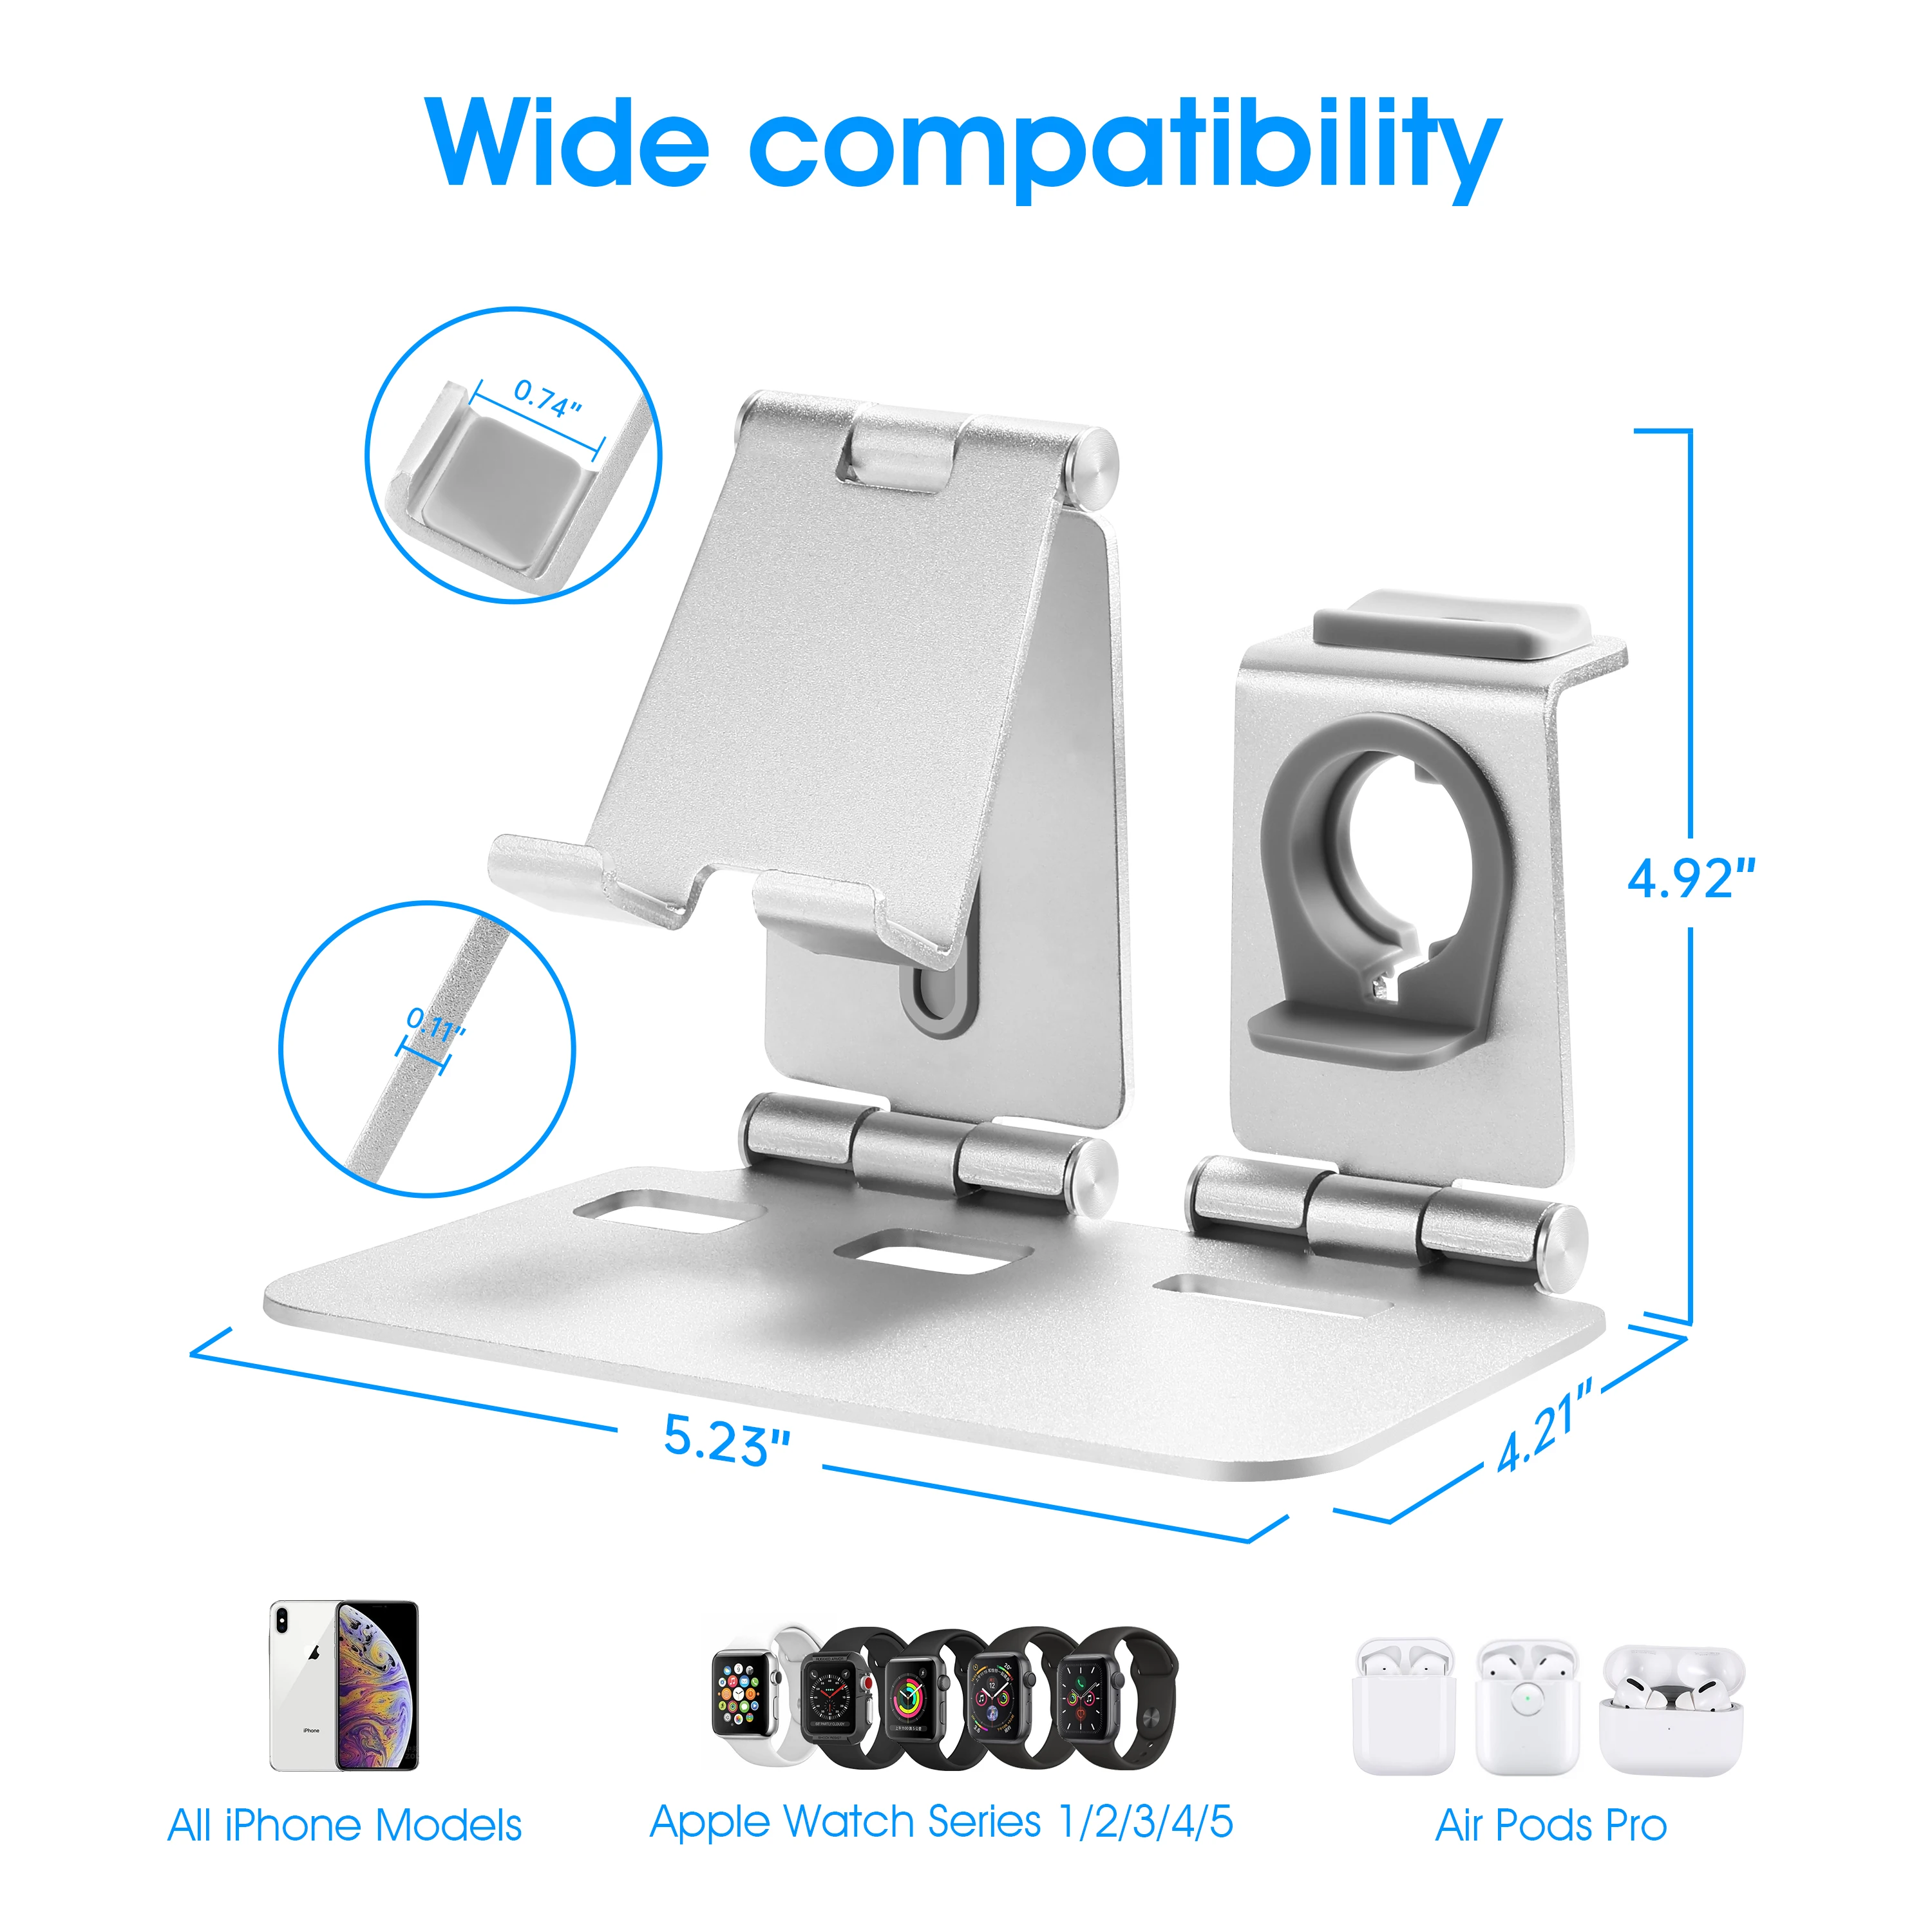 3 in 1 alloy desktop phone charger dock holder for airpods 12 pro apple iwatch stand for all iphone ipad android phone tablet free global shipping